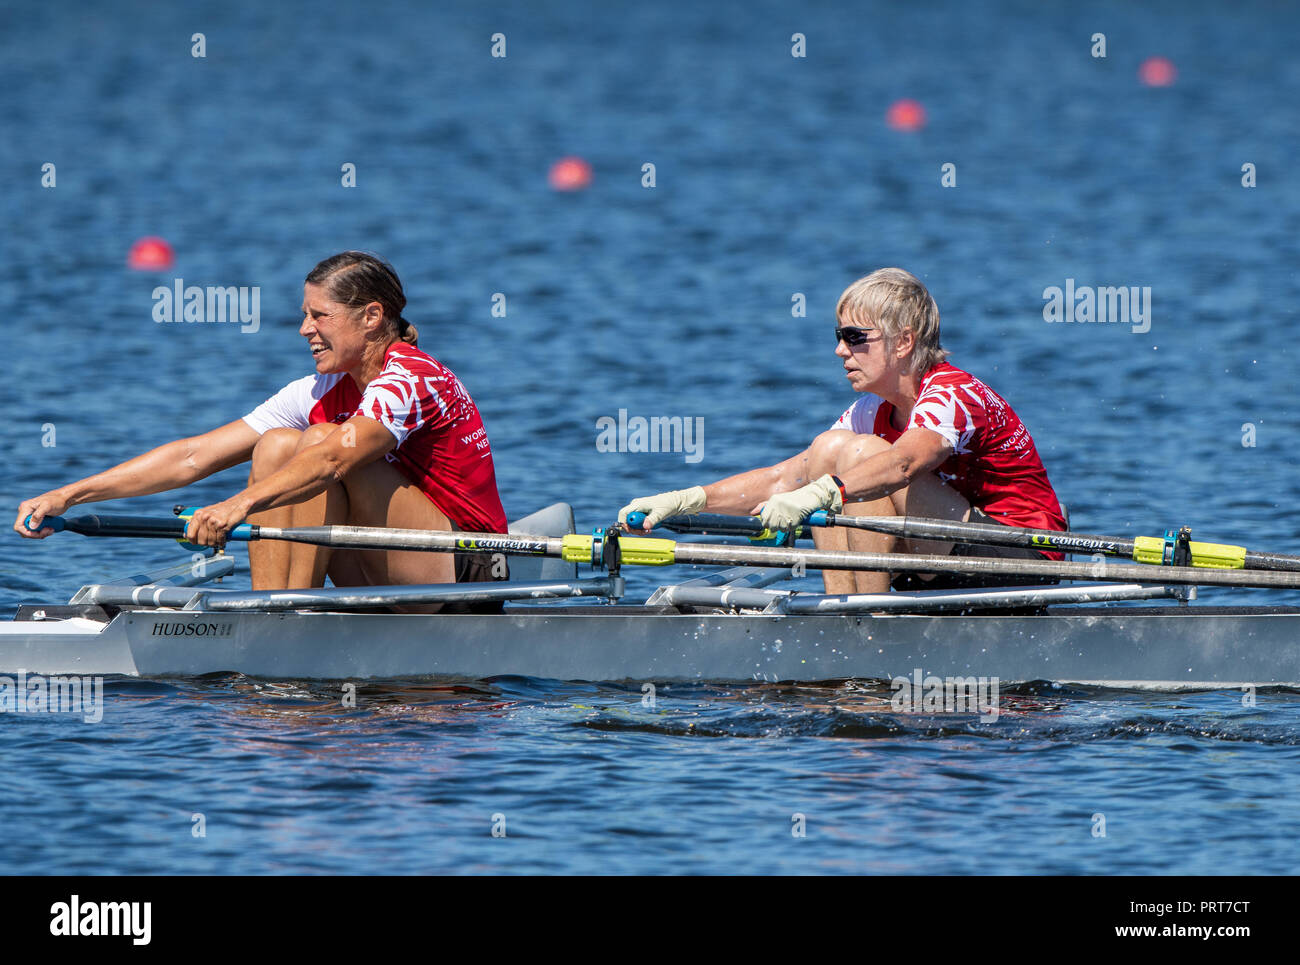 Sarasota, Florida, USA 28th September 2018. FISA, Women's Double Scull Bow, rowing  with Gloves,  Masters World Rowing Championships,  Nathan Benderso Stock Photo